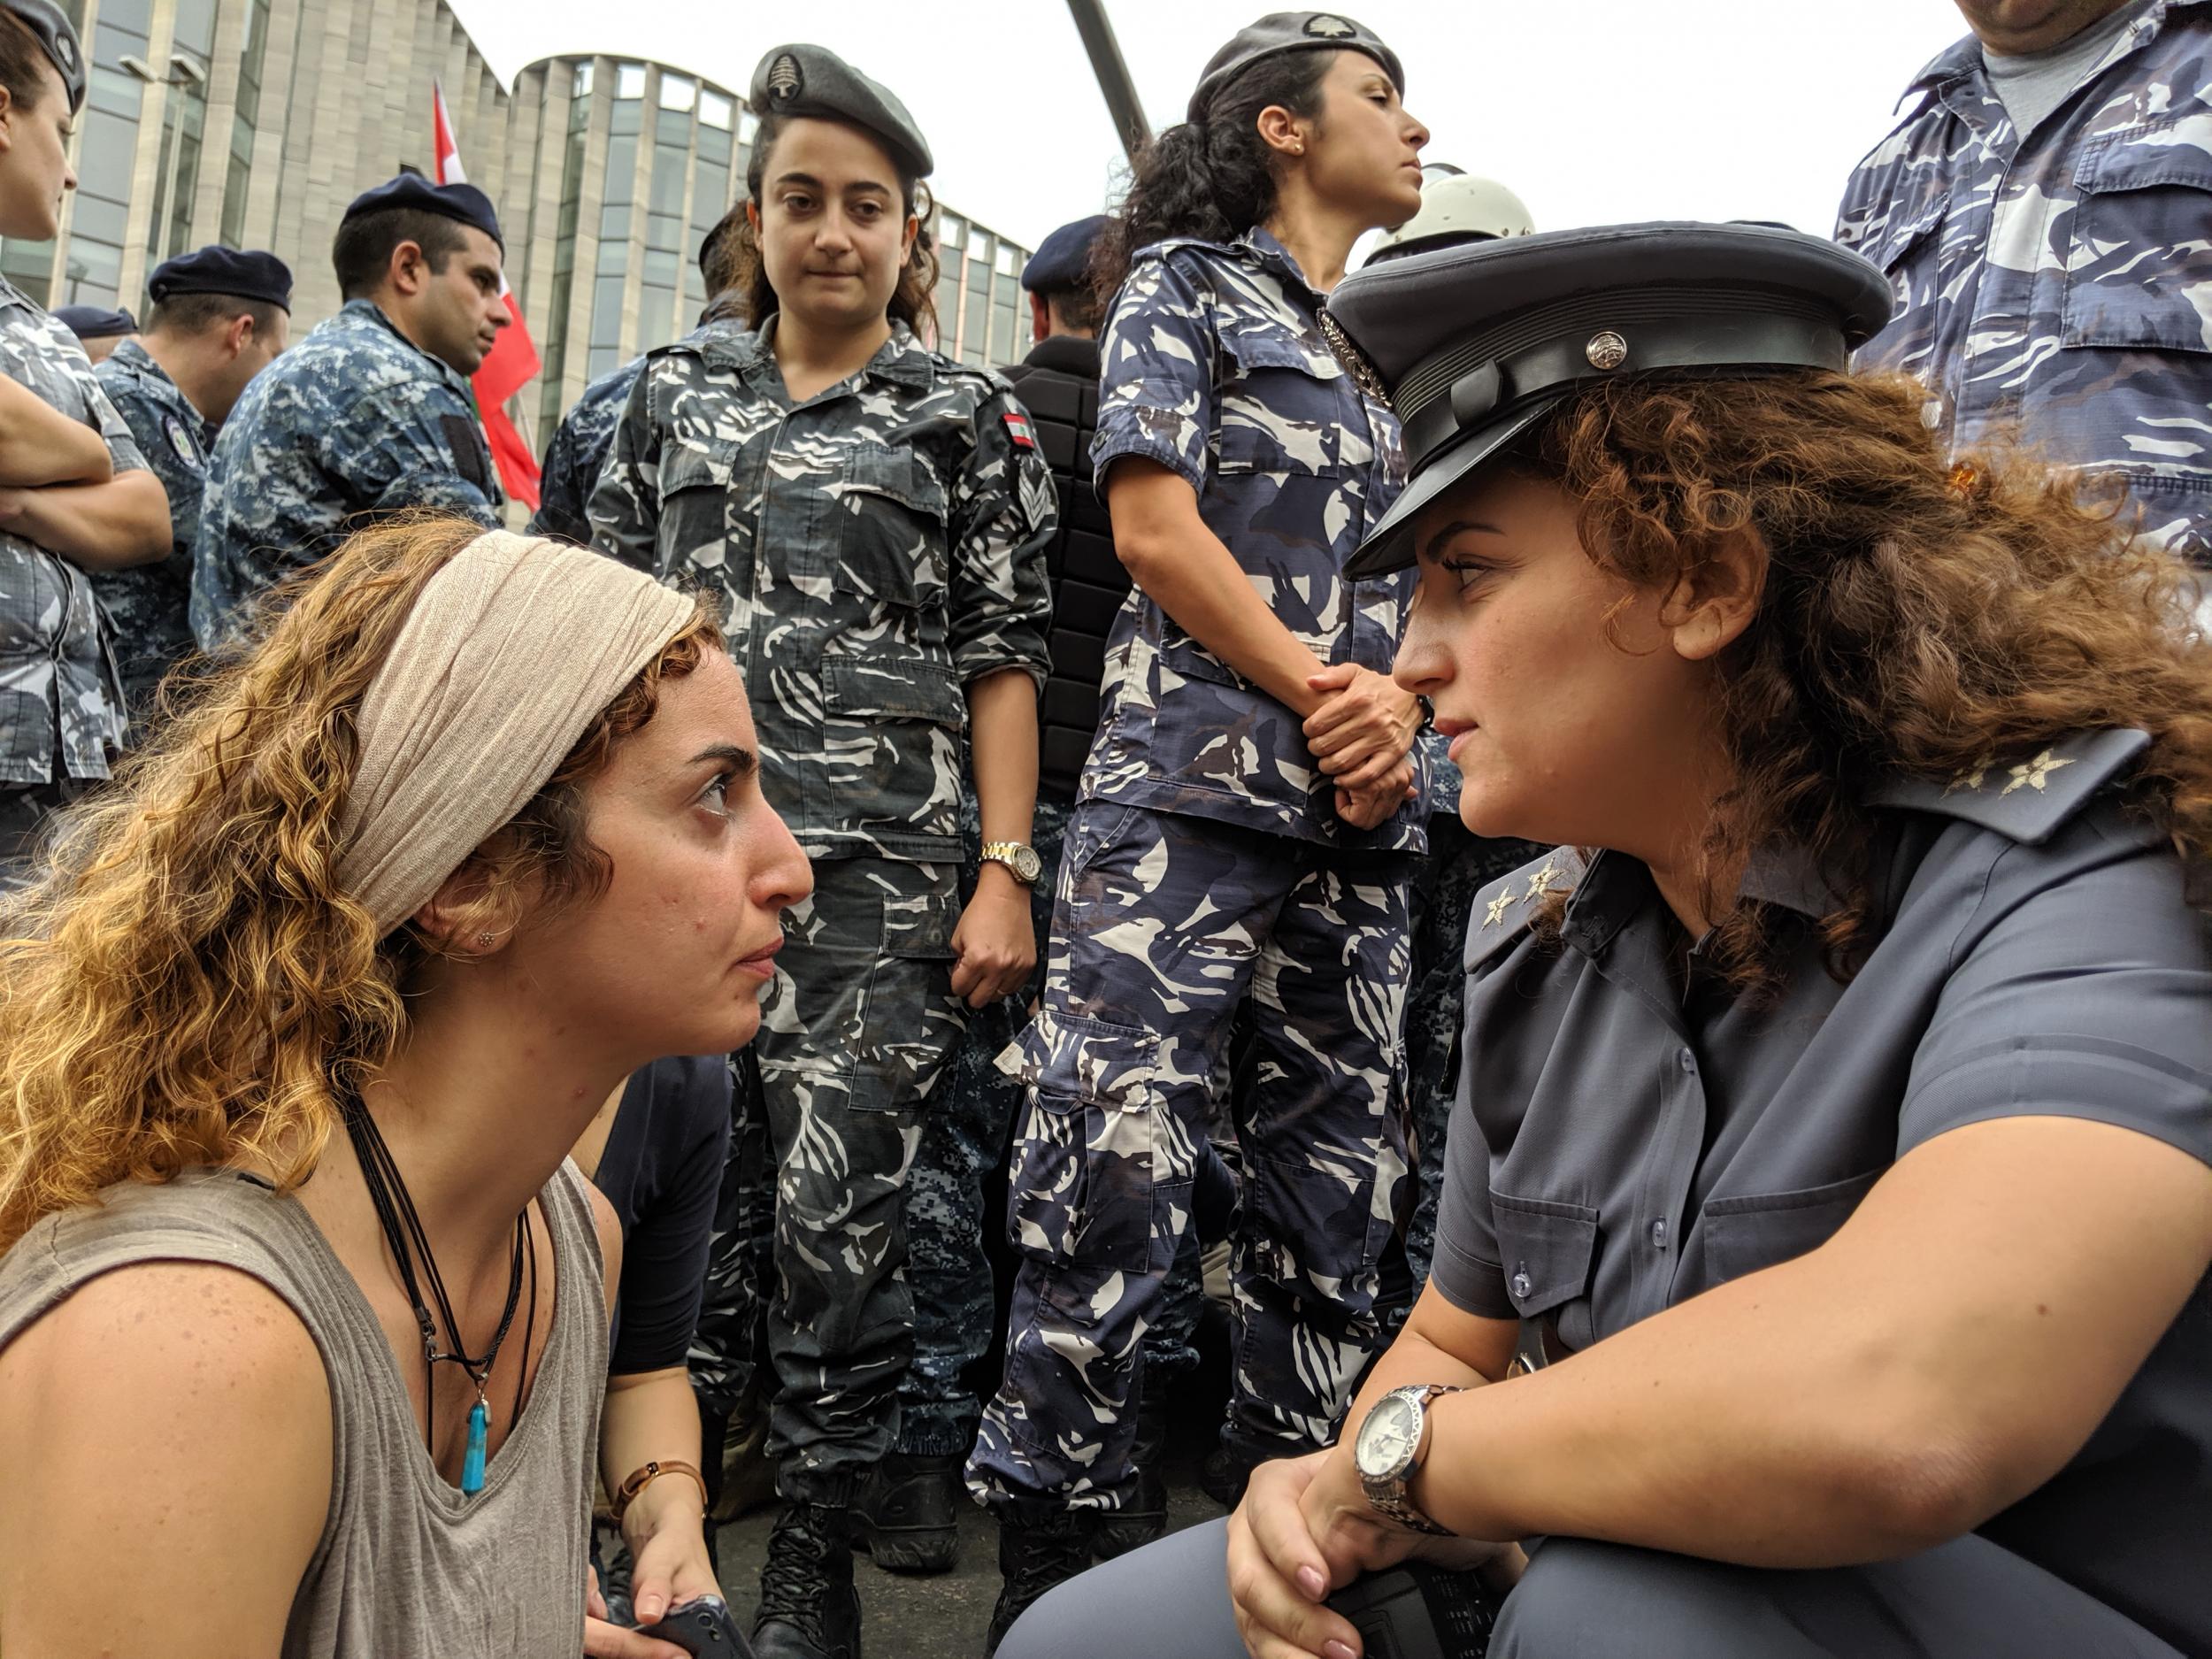 A protester faces off with a police officer at a roadblock sit-in in Beirut